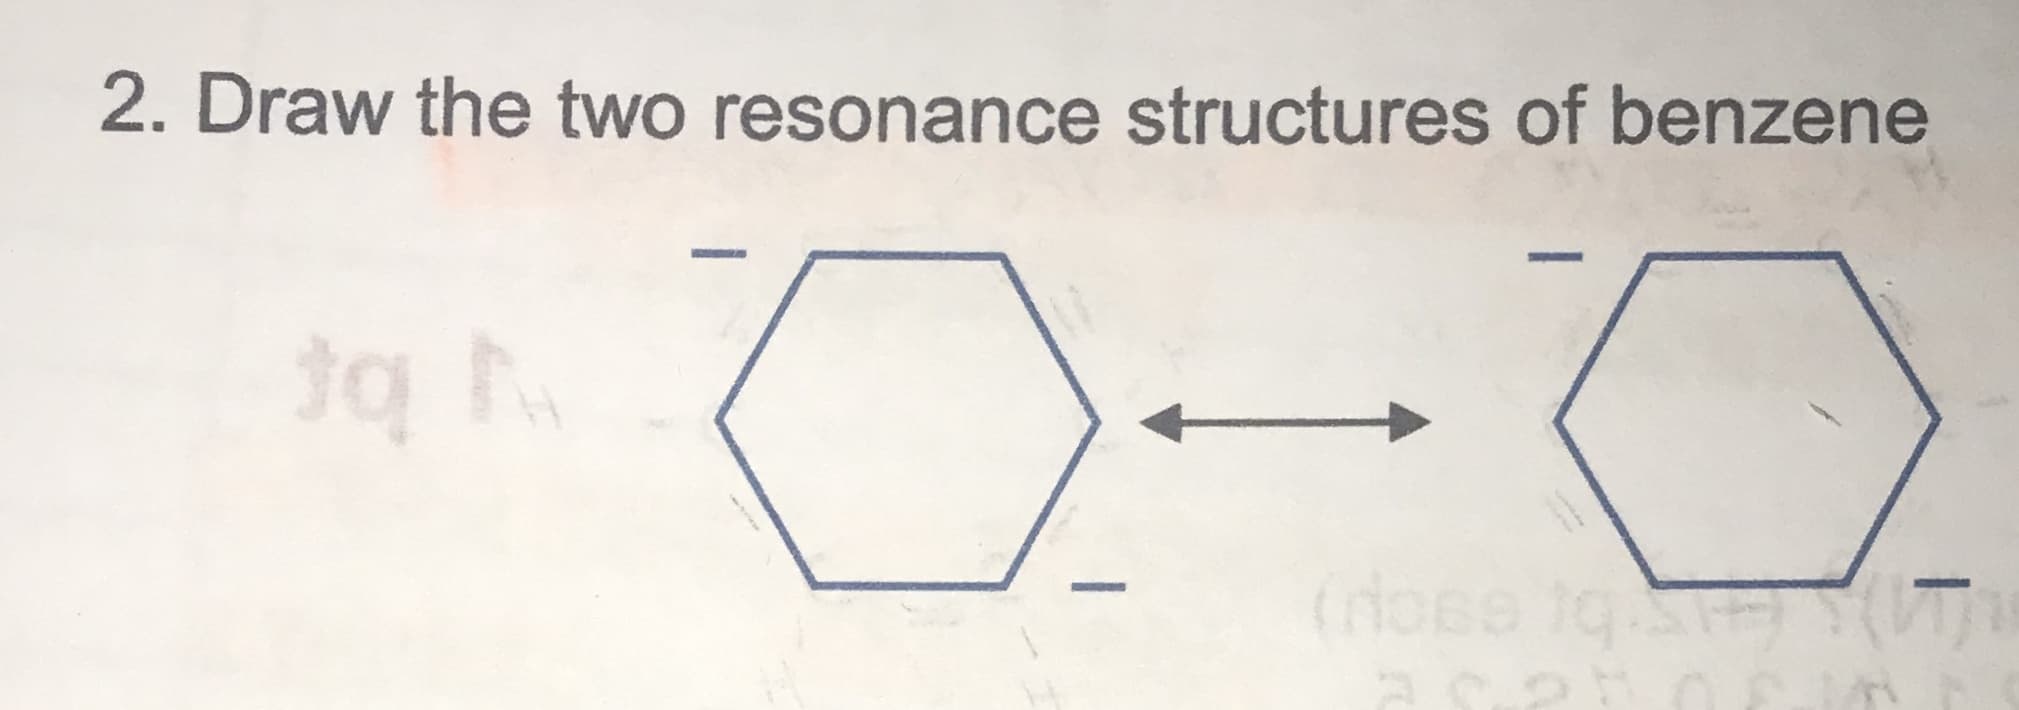 2. Draw the two resonance structures of benzene
(nose 1q T)
